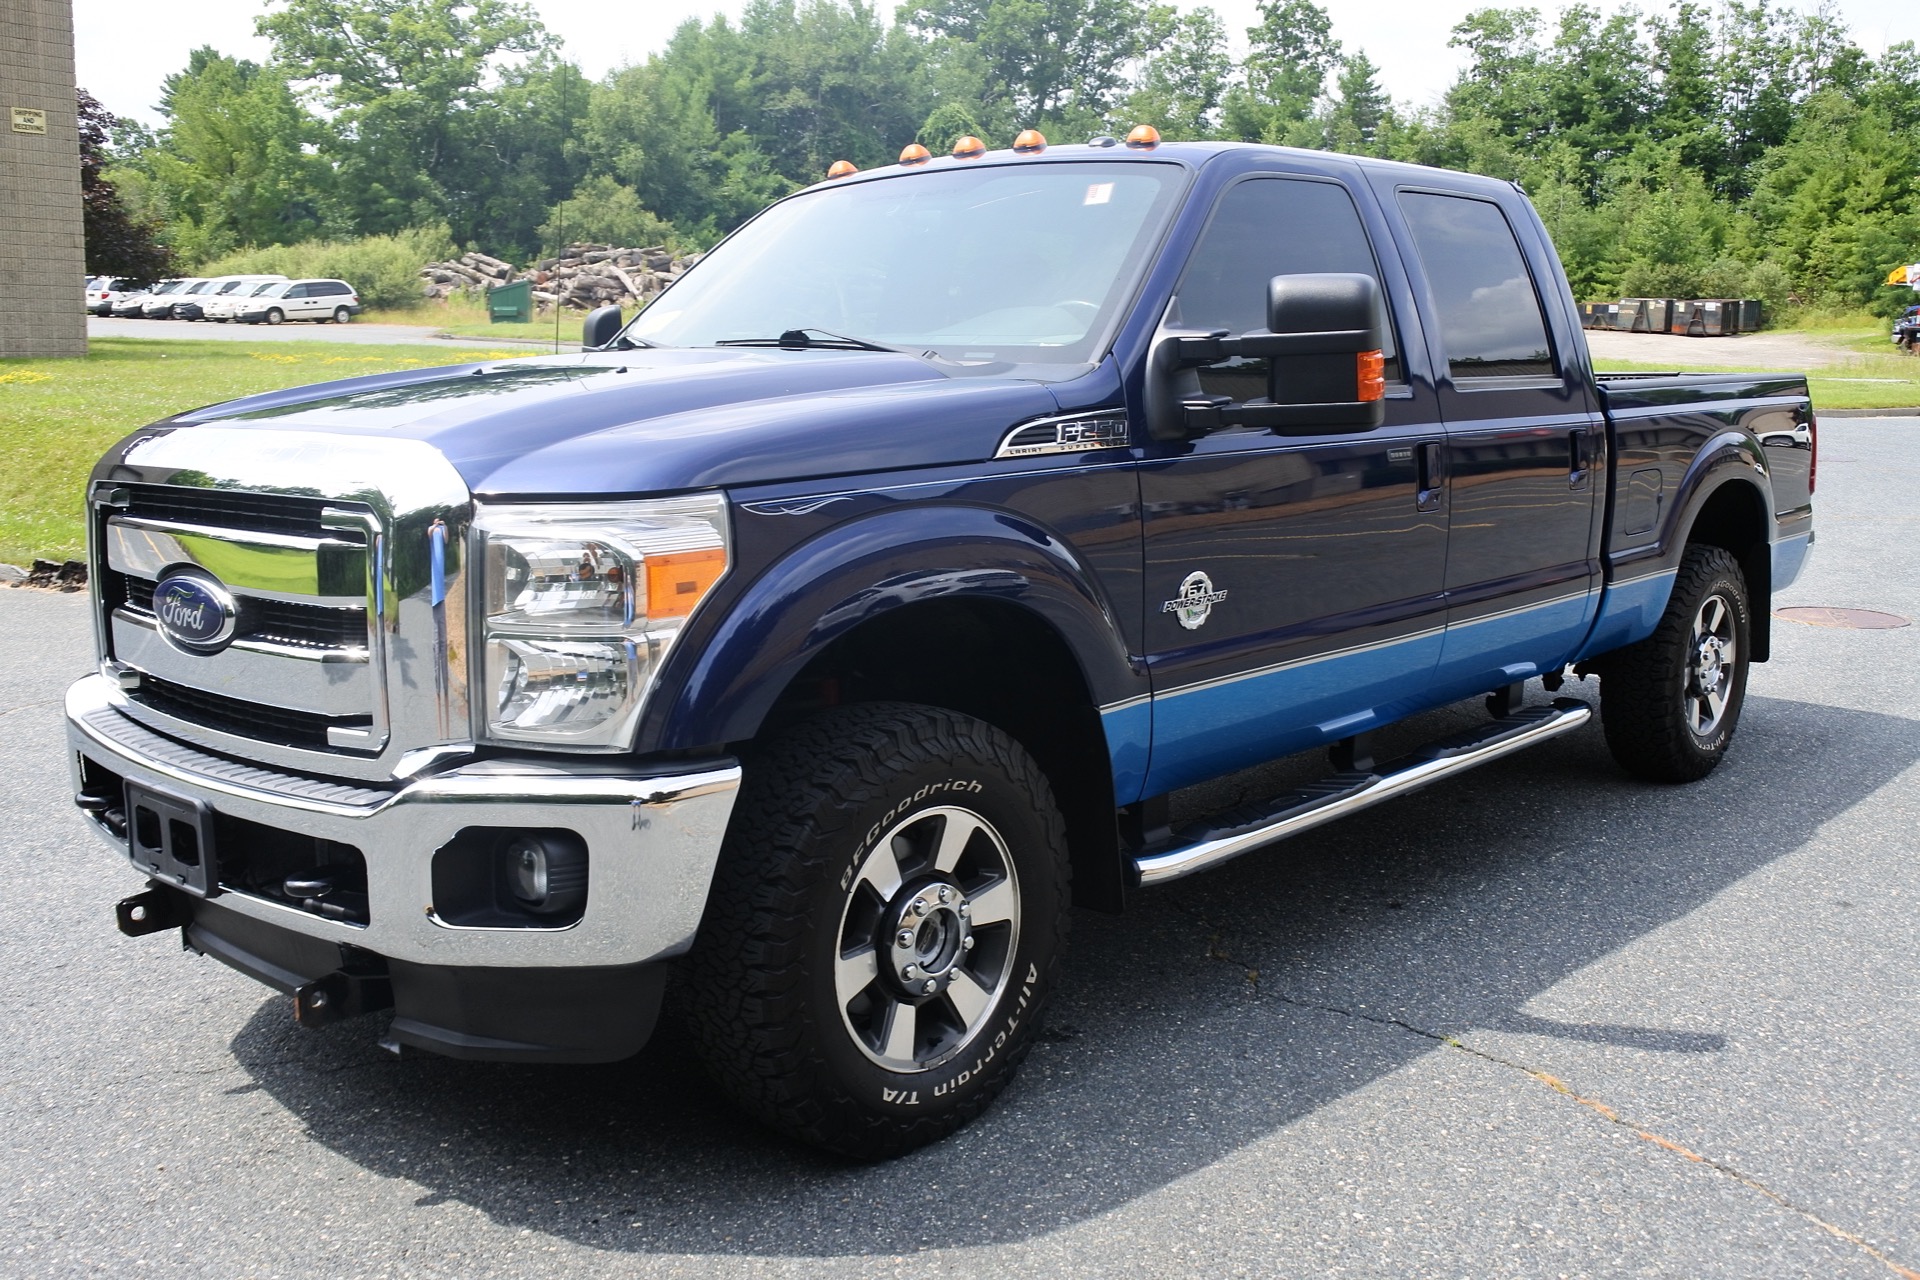 Used 2012 Ford Super Duty F-250 Srw 4WD Crew Cab 156' Lariat For Sale  ($33,885) | Metro West Motorcars LLC Stock #C43929